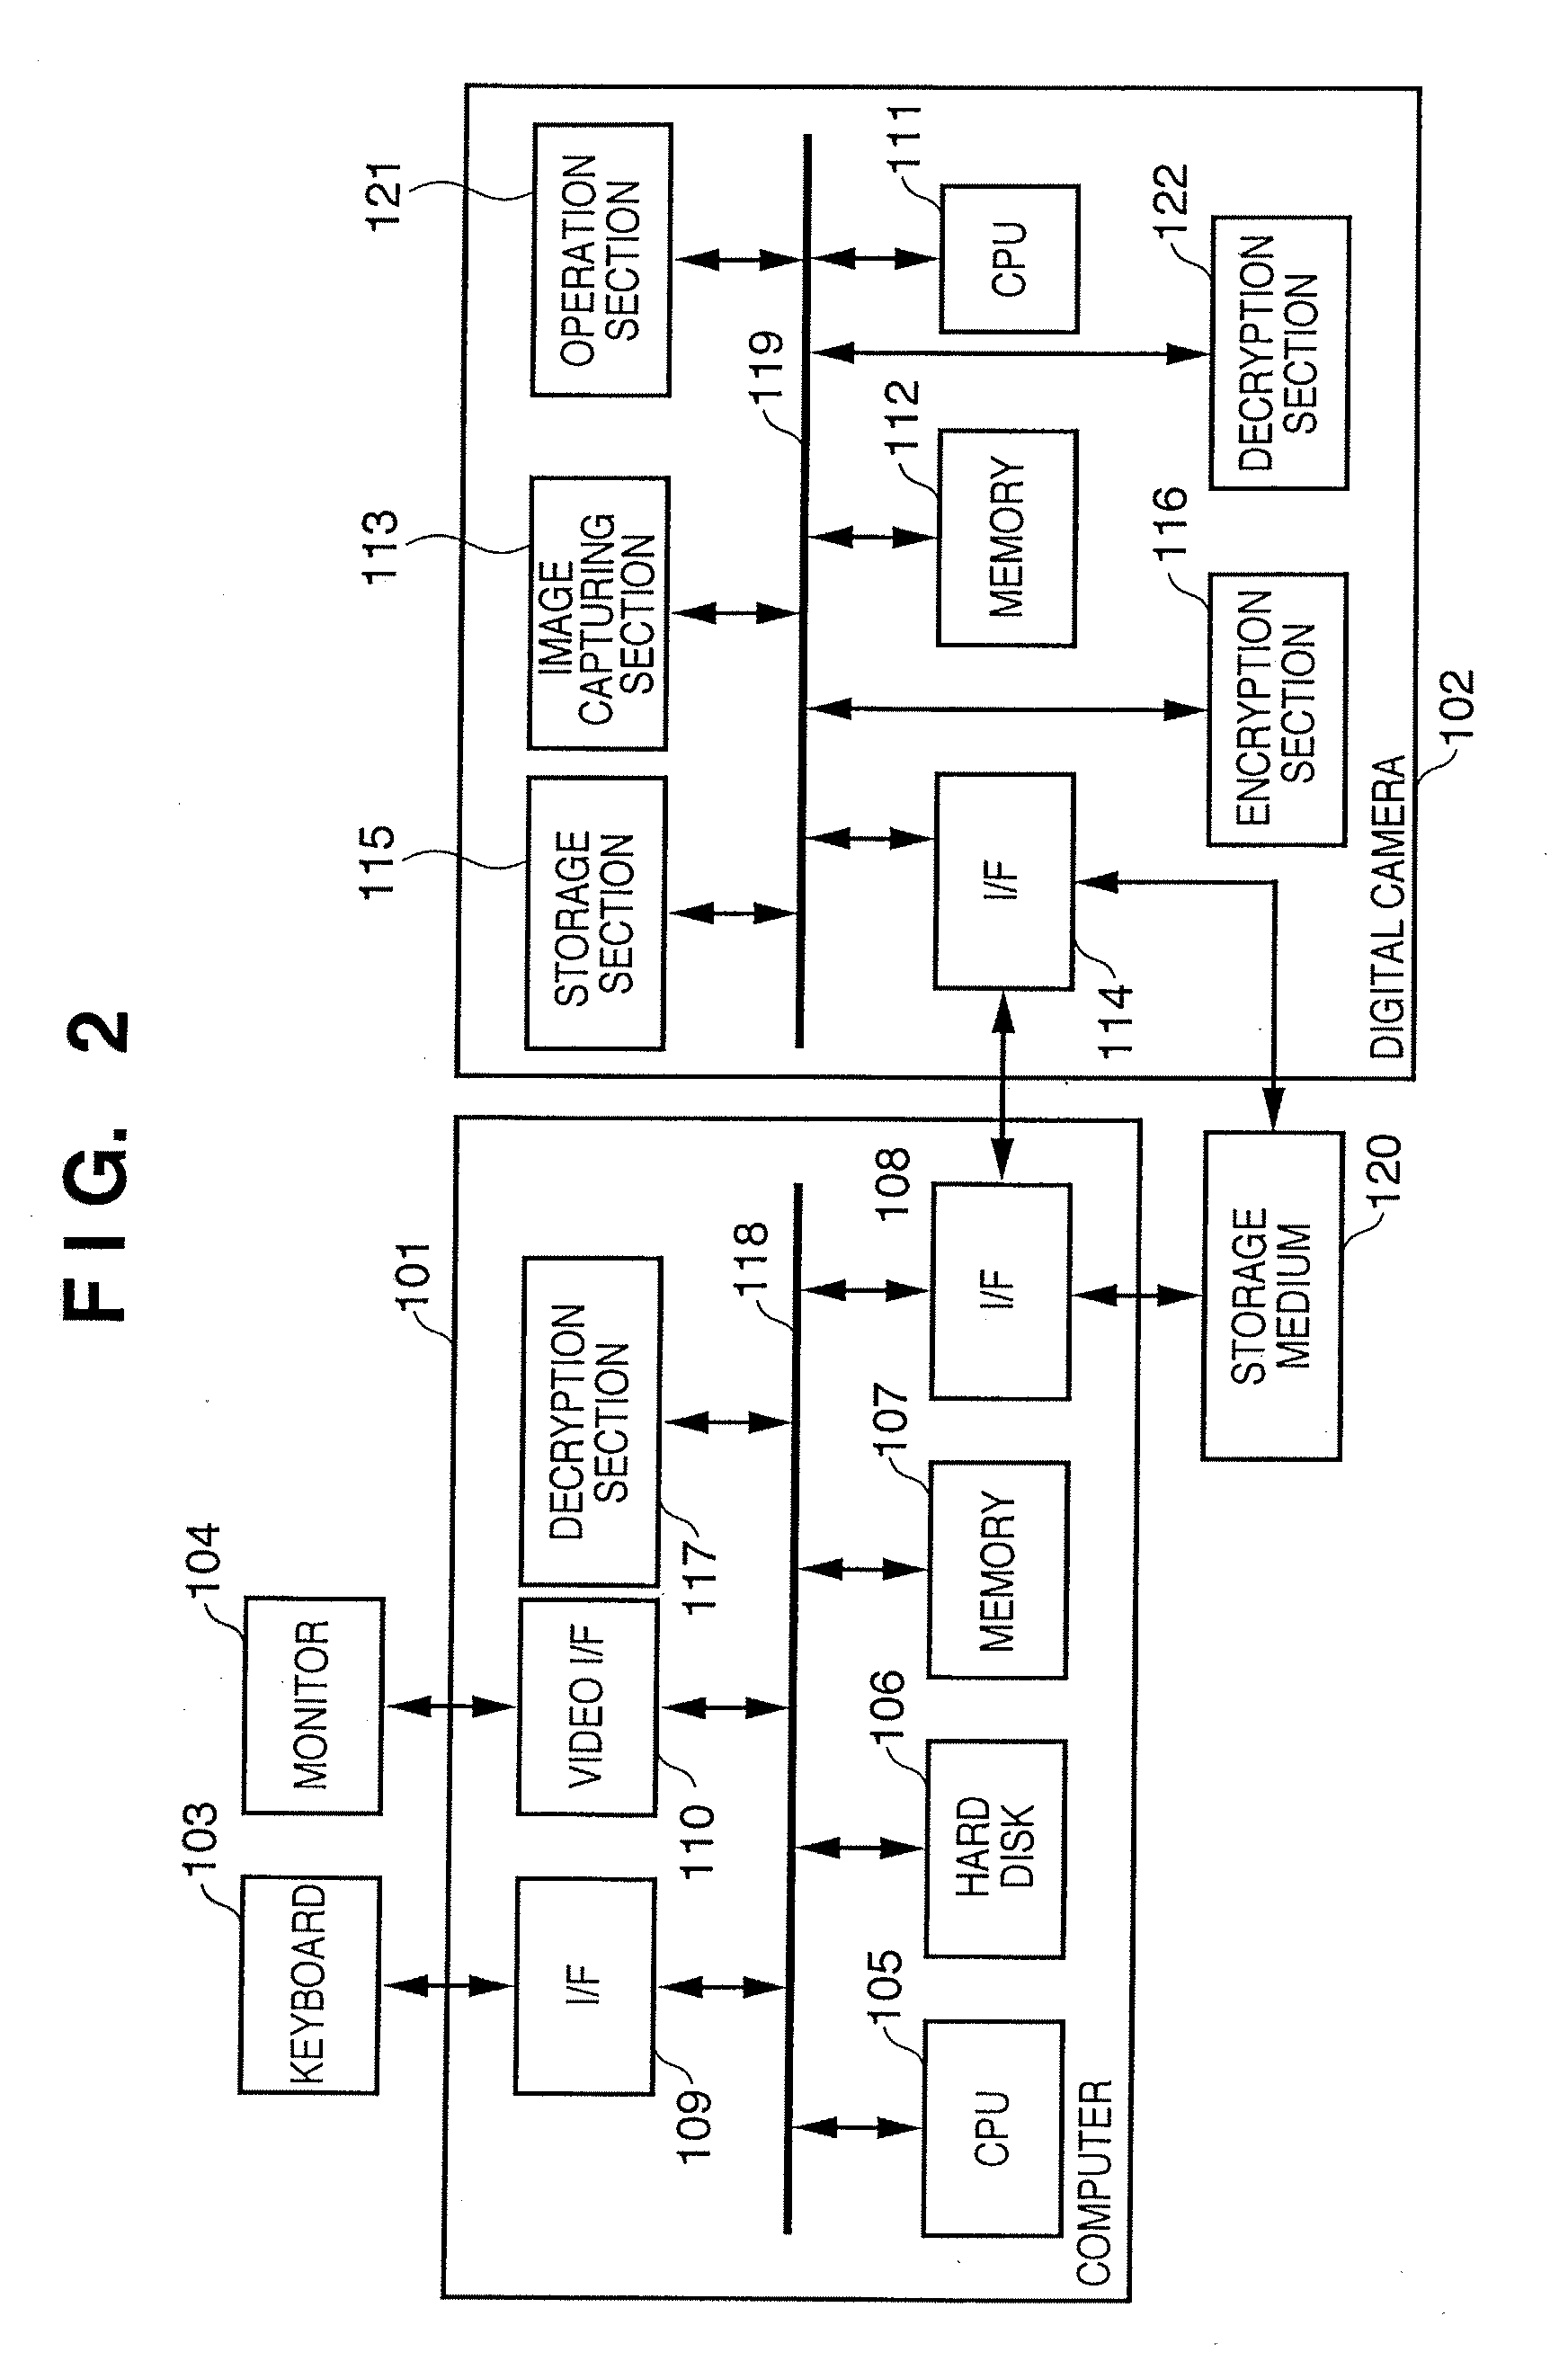 Information processing apparatus, data processing apparatus, and methods thereof